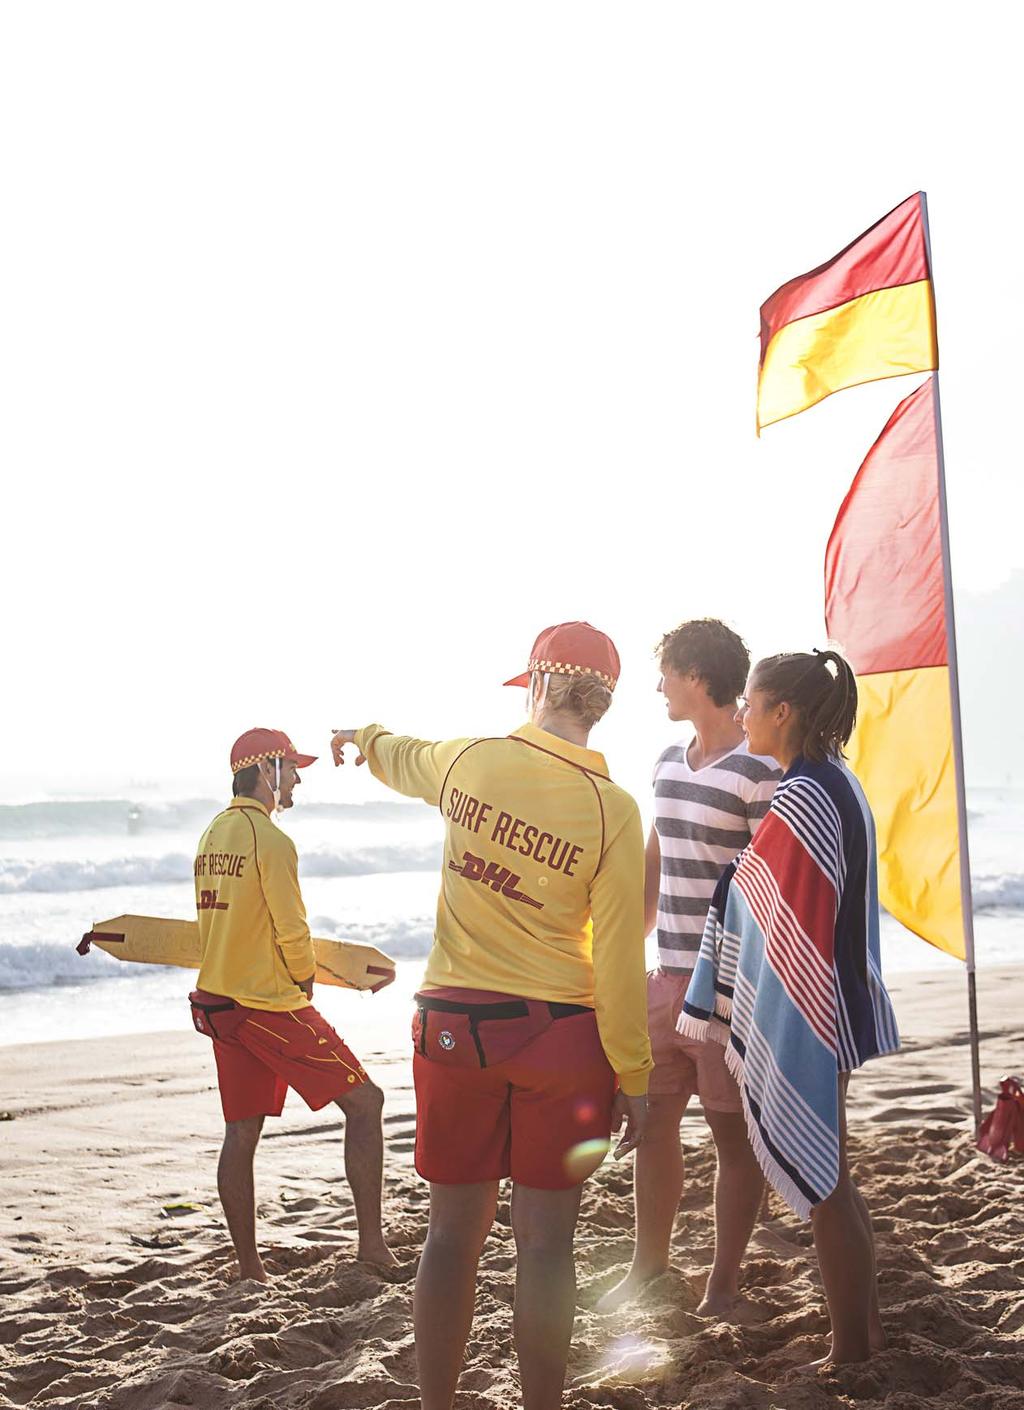 Contact Us The Surf Life Saving Foundation ABN 47 945 812 553, ACN 159 849 591 Street: 190 Montpelier Road, Bowen Hills, QLD 4006 Mail: GPO Box 9950, Brisbane QLD 4001 Phone: 07 3177 5800 Fax: 1800